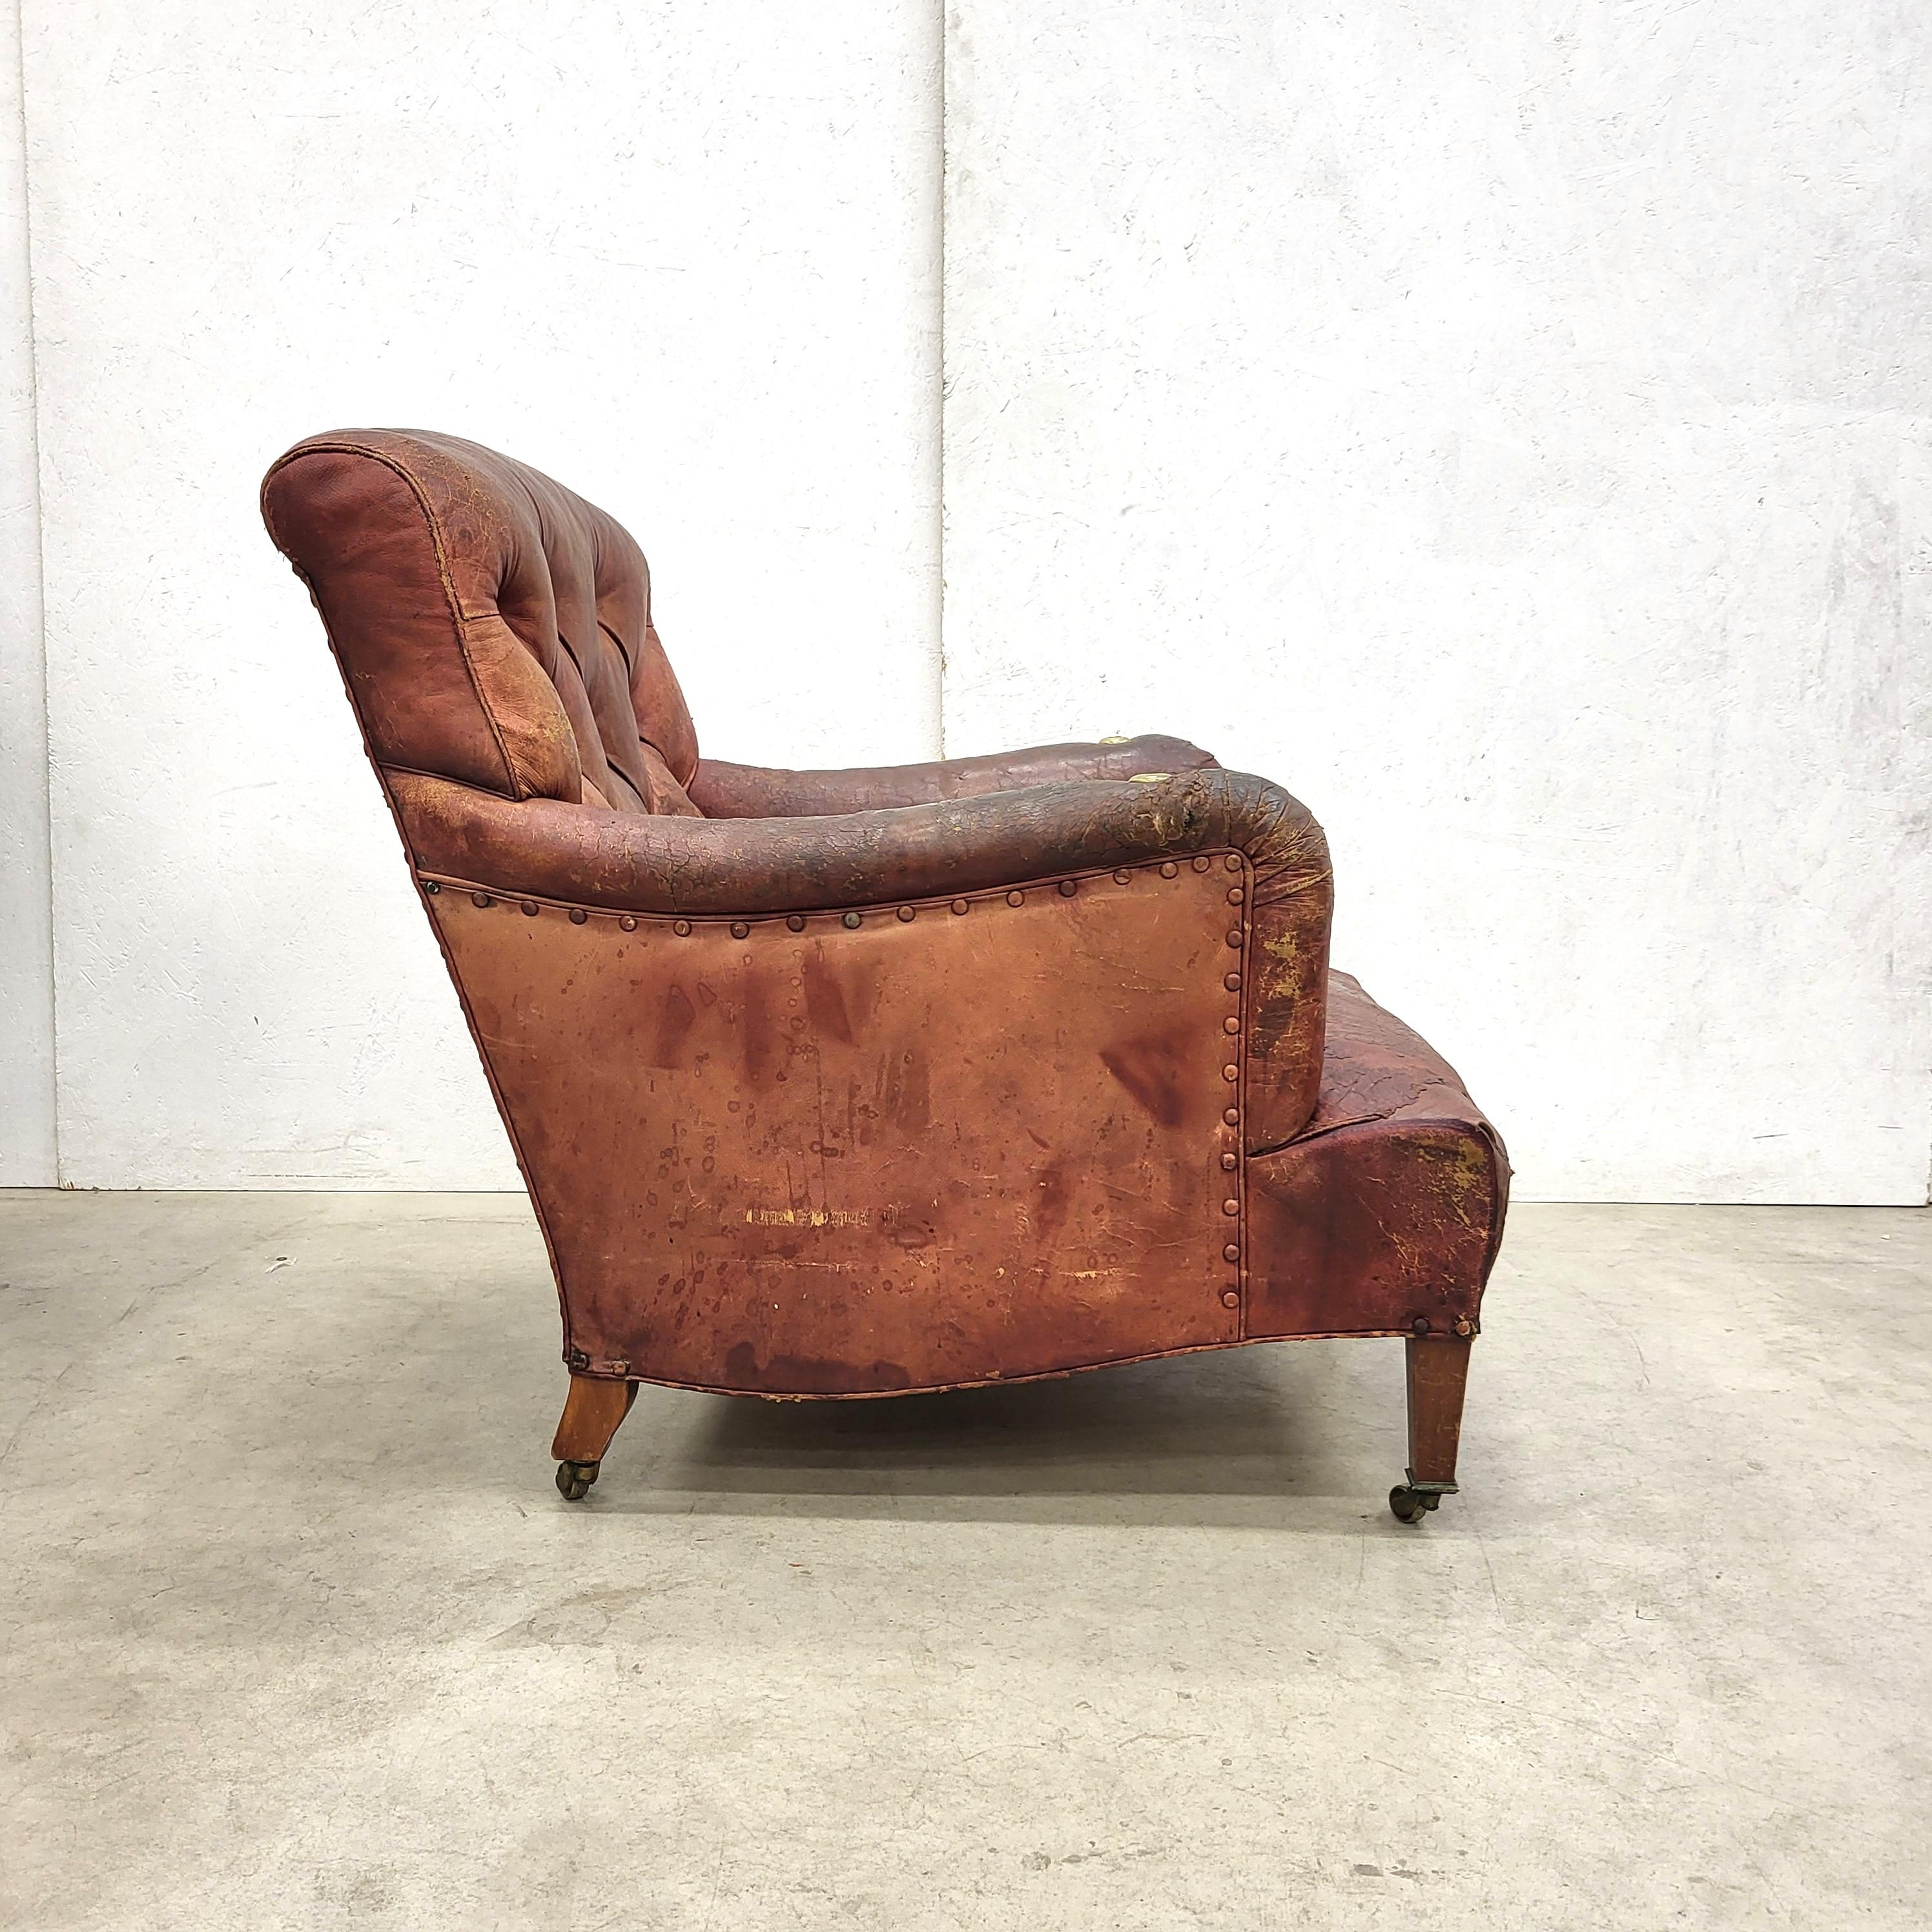 Antique and very rare Bridgewater armchair by Howard & Son's original made in England with an amazing patina and the original leather upholstery!

The piece was purchased in the late 19th century and was since then owned by the same family!
It